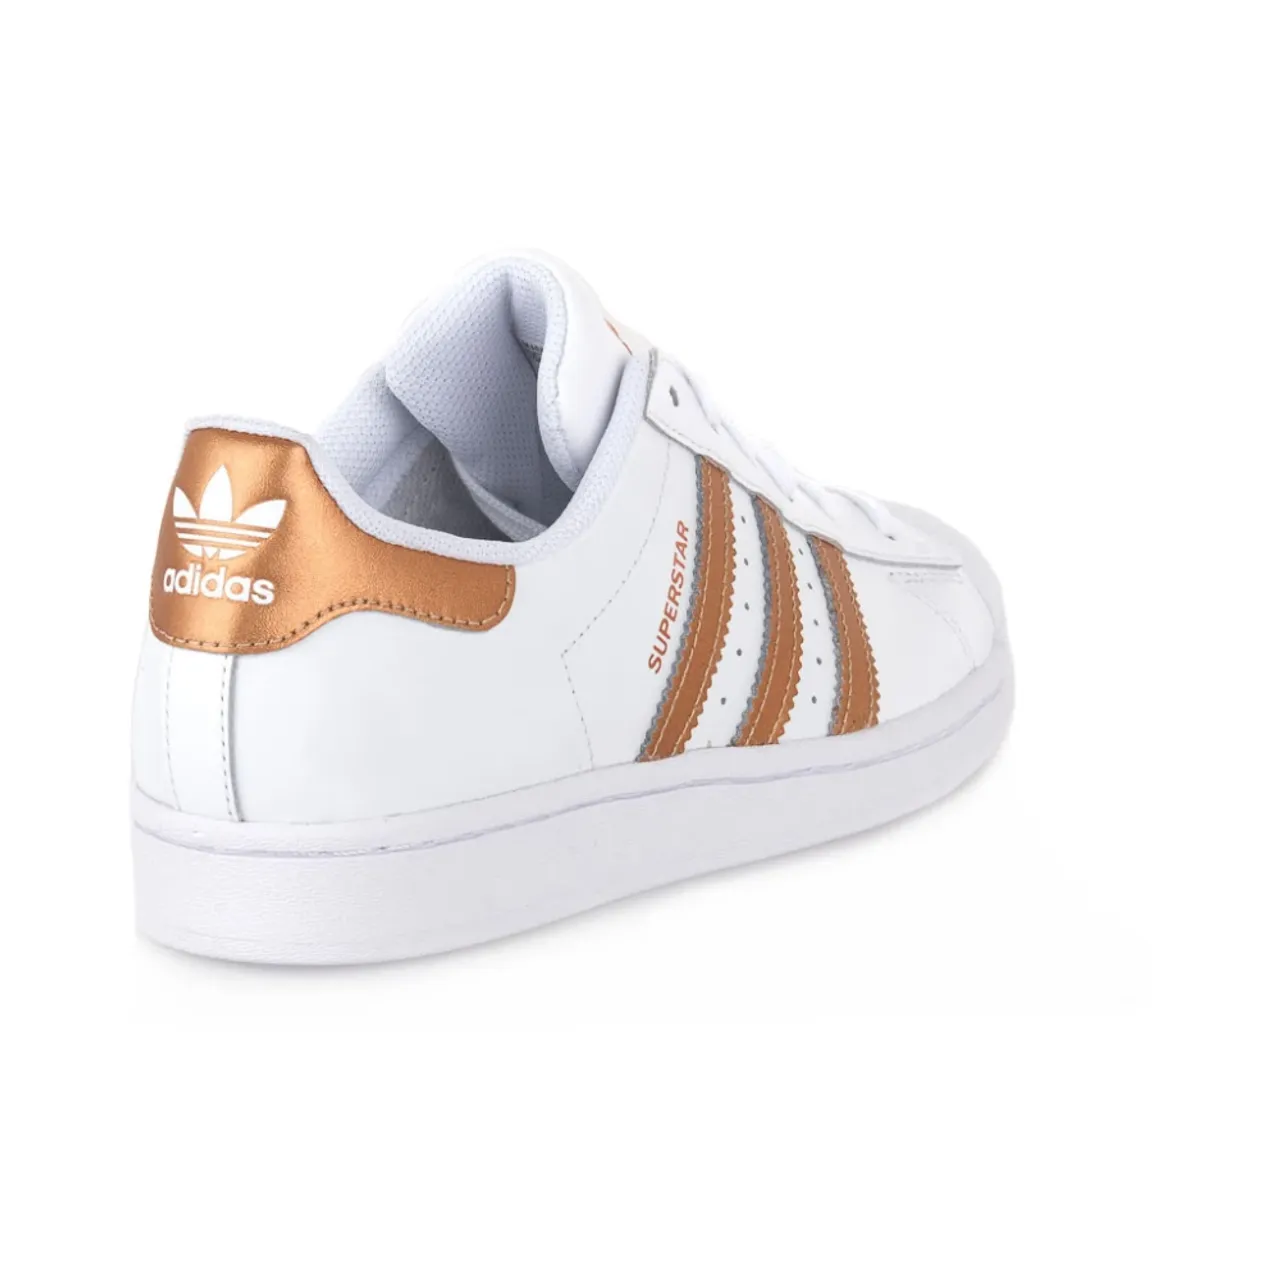 Adidas Originals , Superstar W Sneakers - Stylish and Sporty ,White female, Sizes: